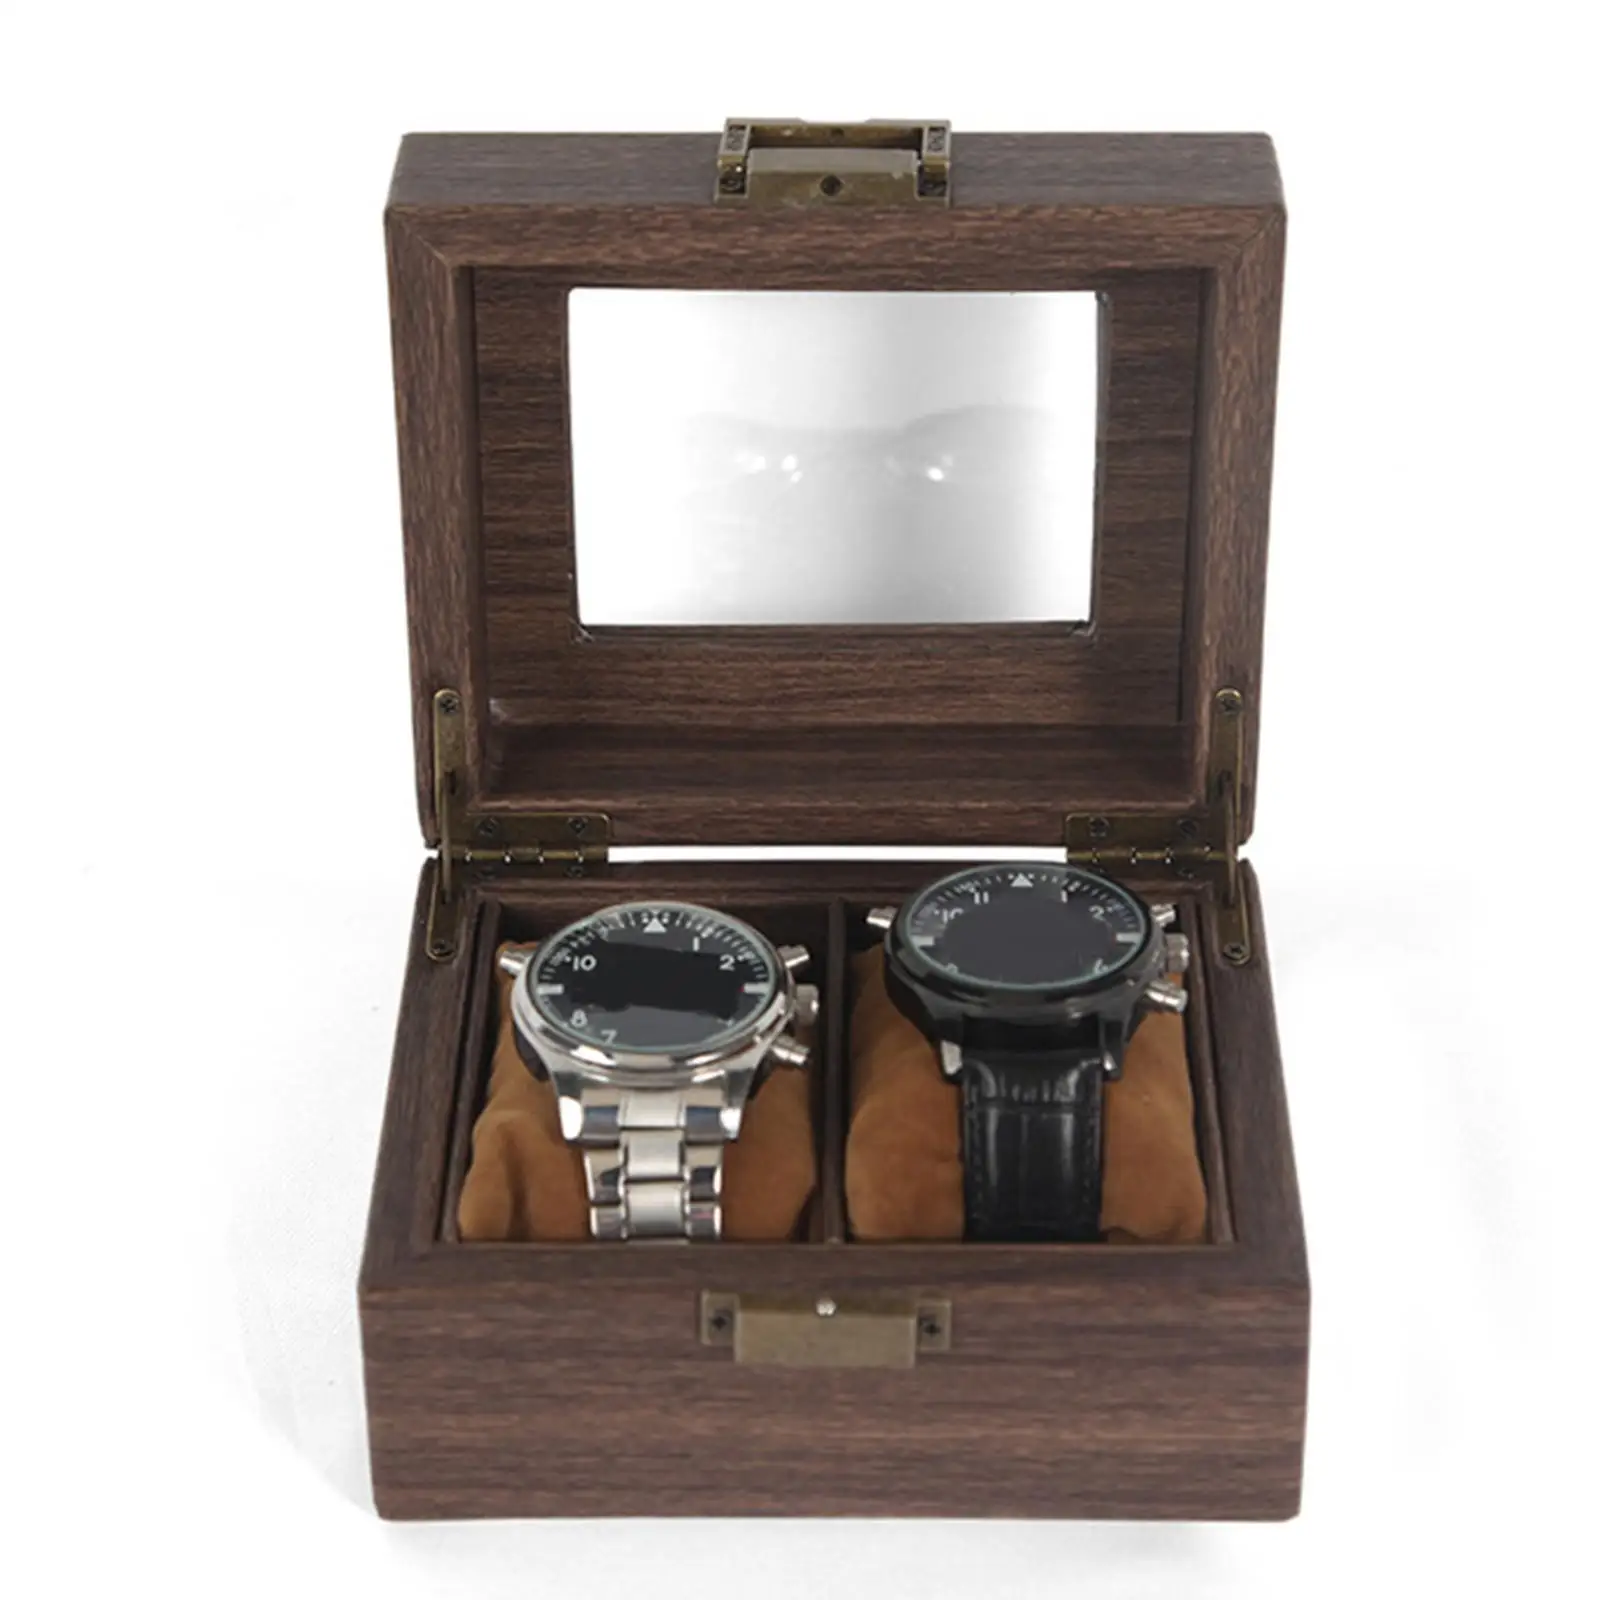 Watch Display Case Portable Wooden W/ Jewelry Organizer for Gifts